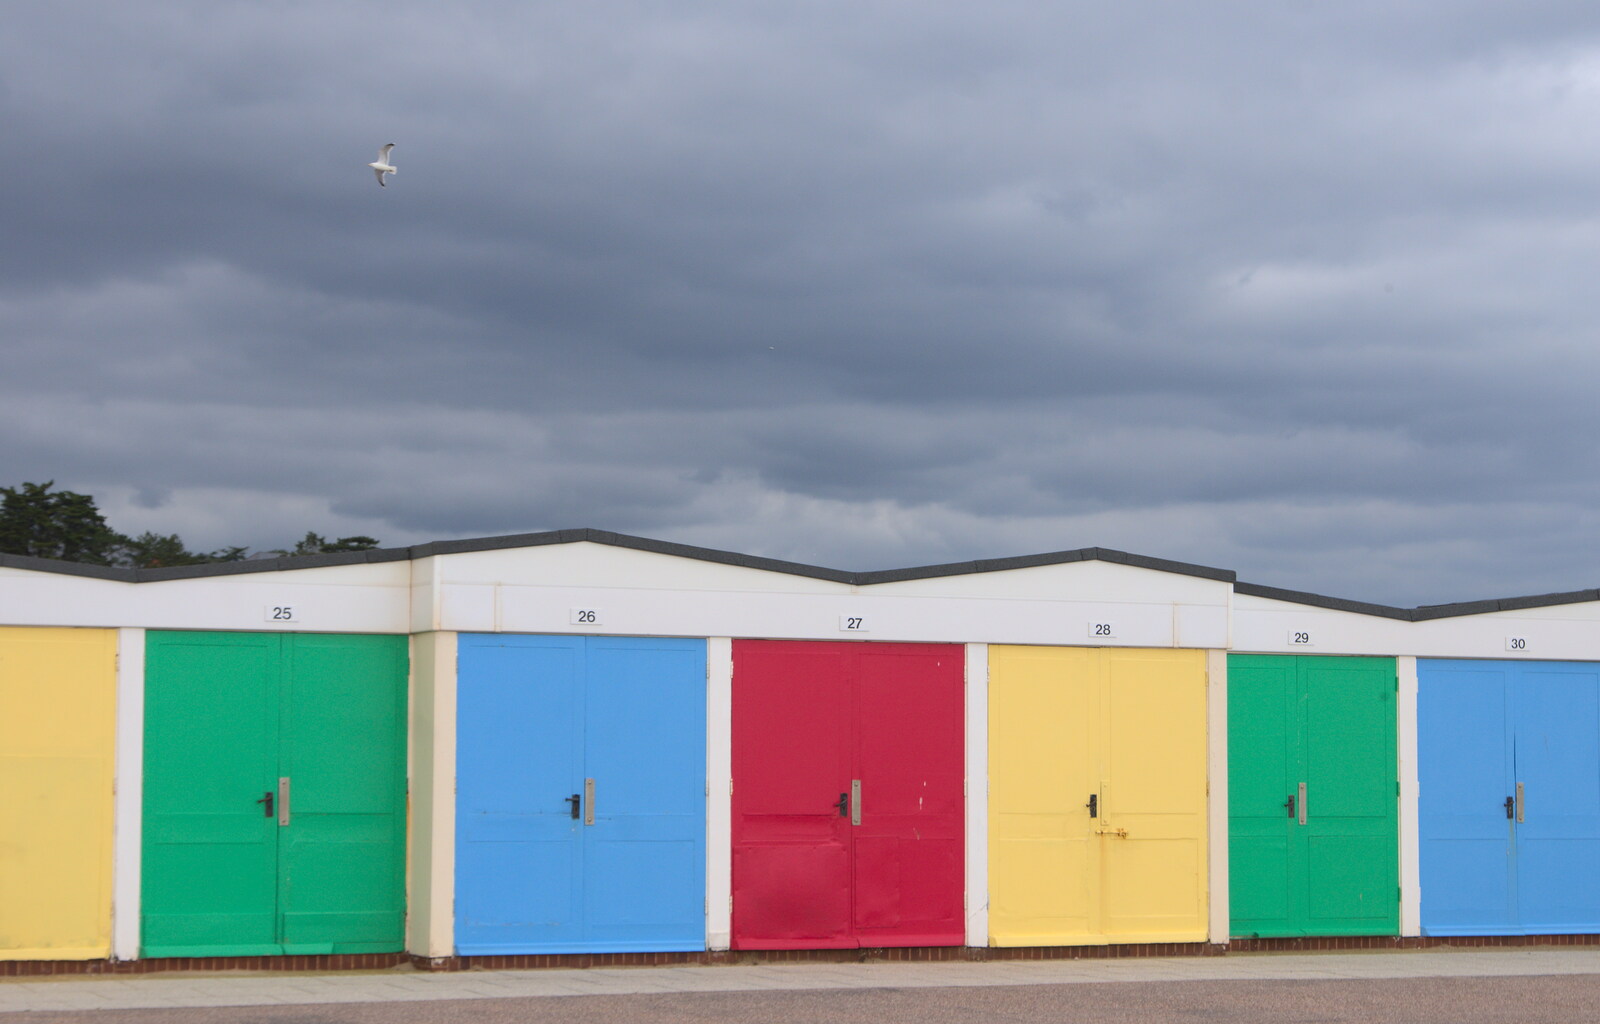 Beach huts from Grandma J's and a Day on the Beach, Spreyton and Exmouth, Devon - 13th April 2017